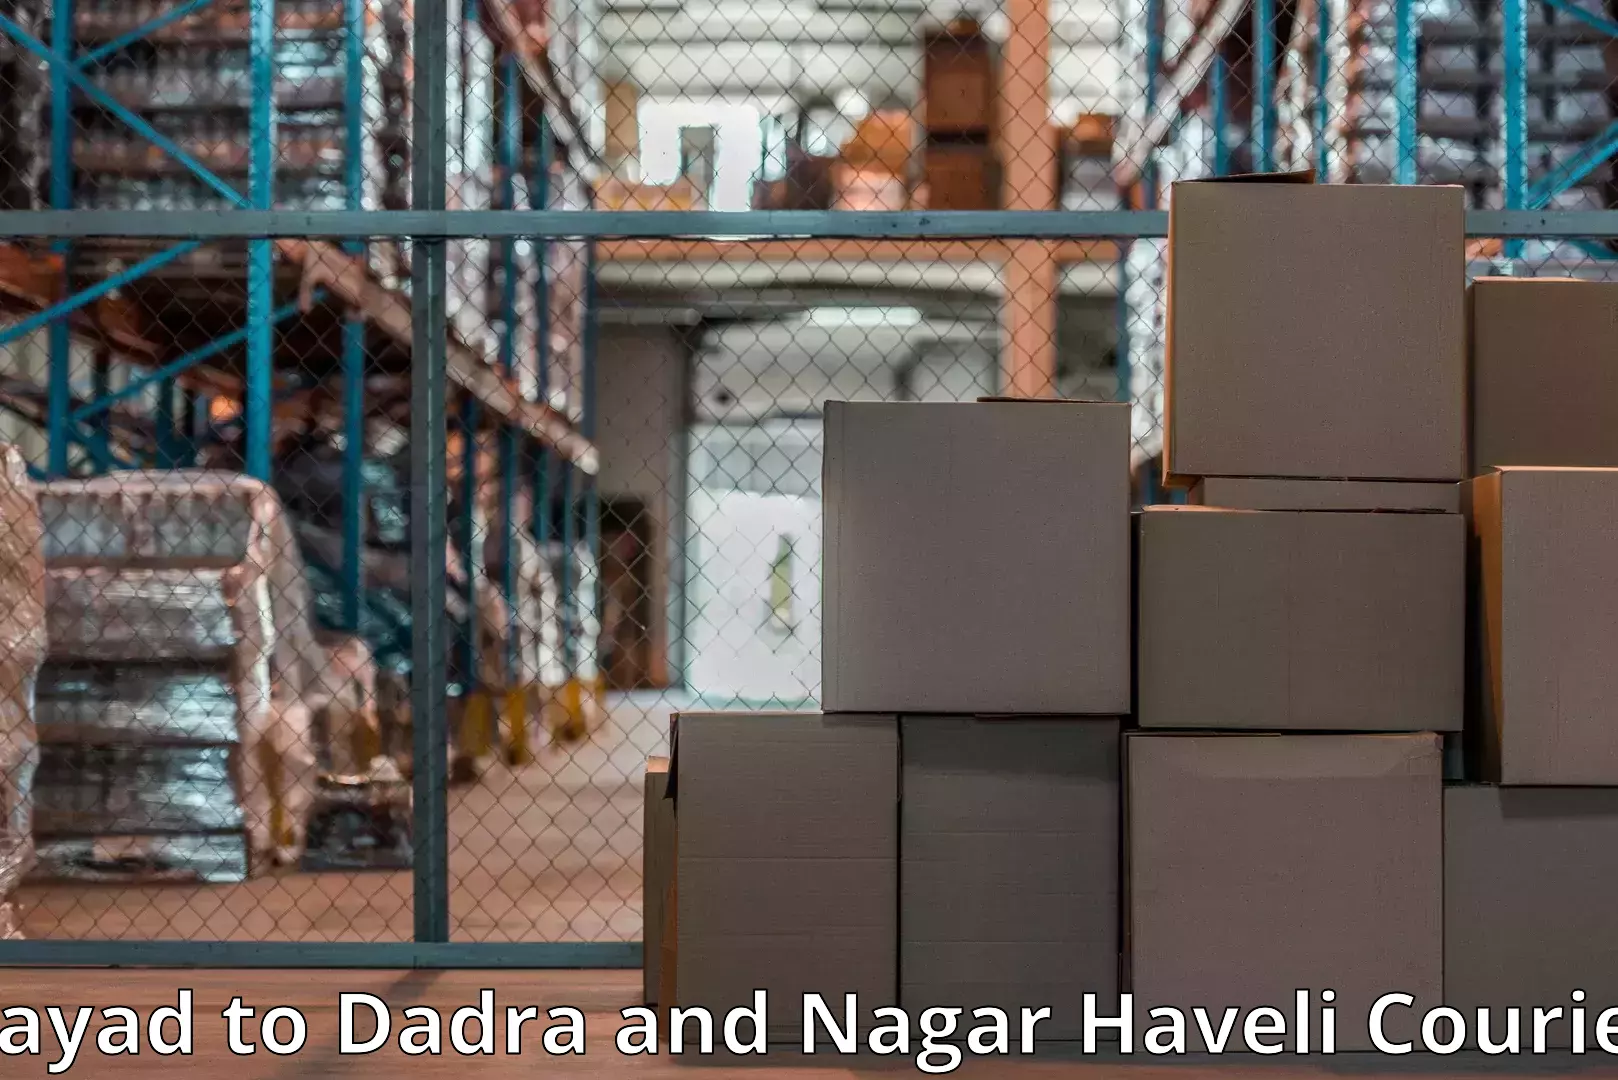 Quality relocation services in Bayad to Dadra and Nagar Haveli